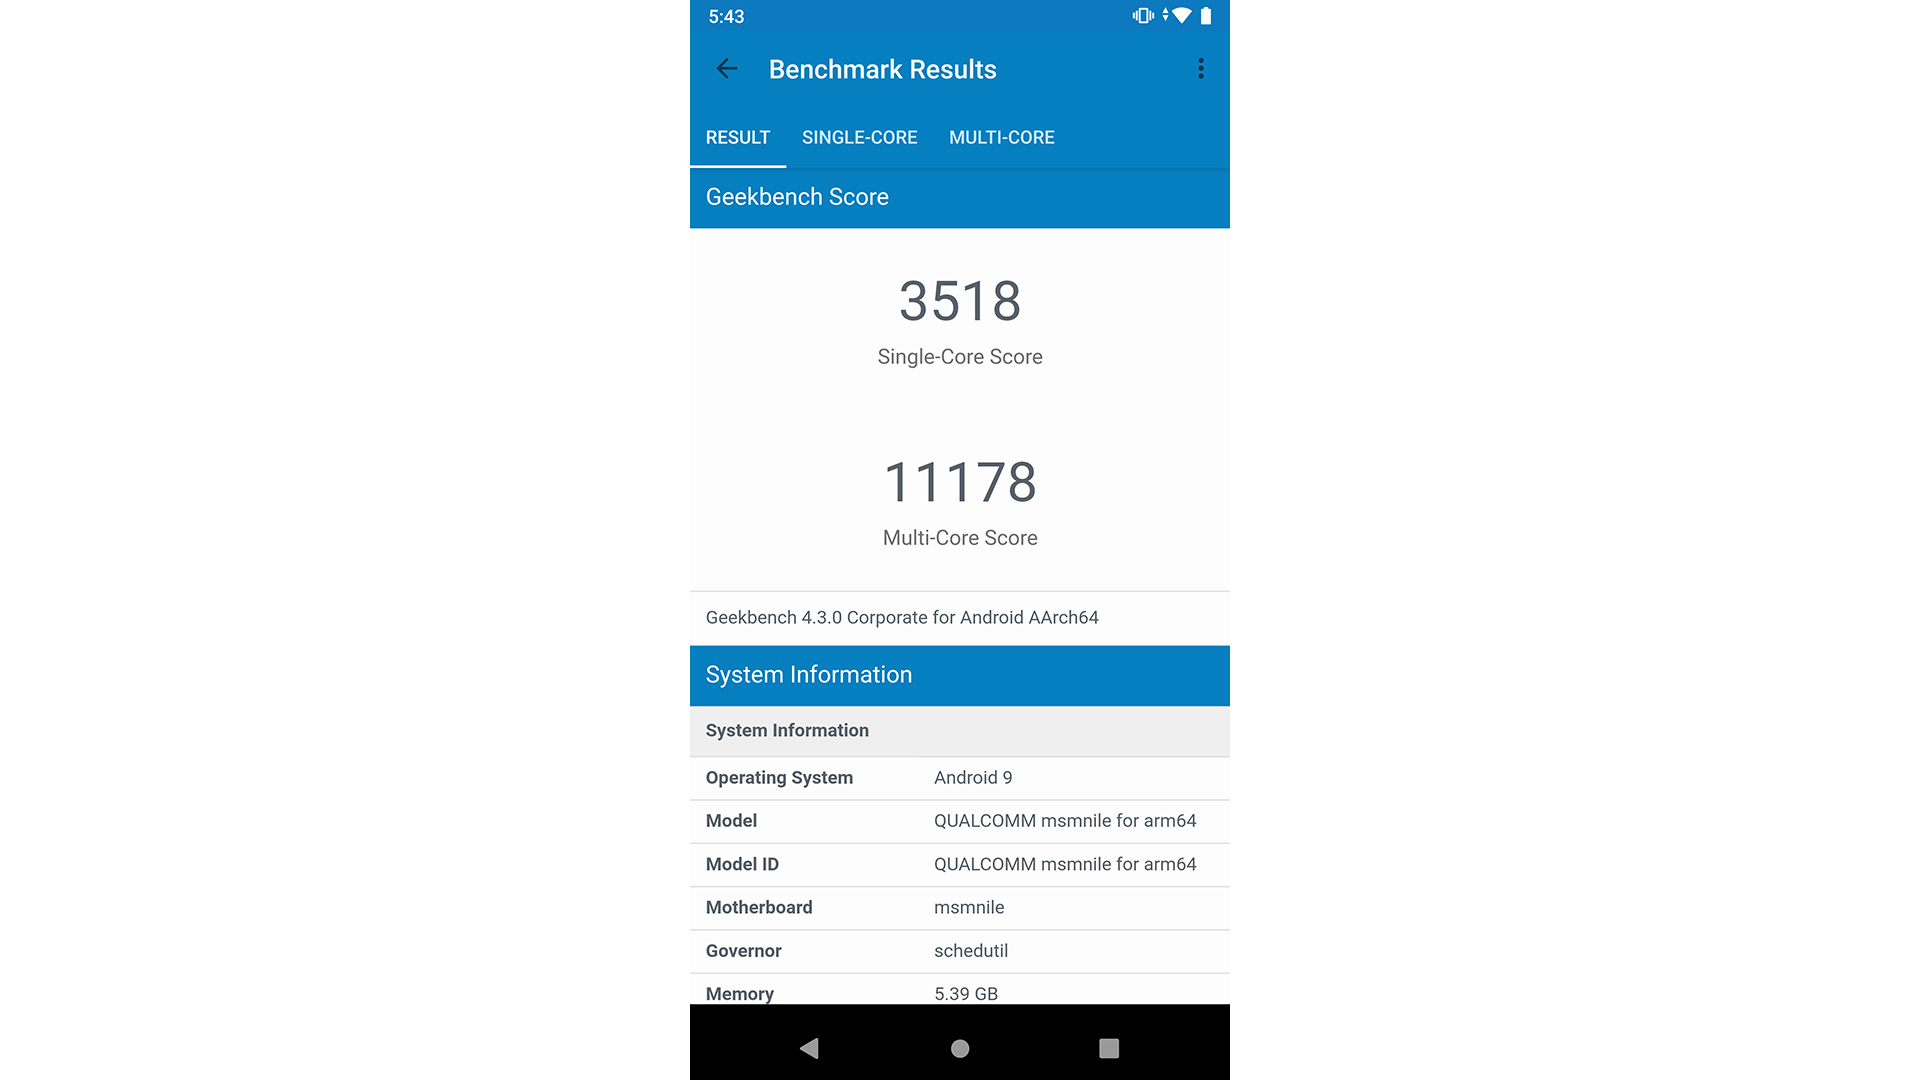 Geekbench multicore results for the Qualcomm Snapdragon 855